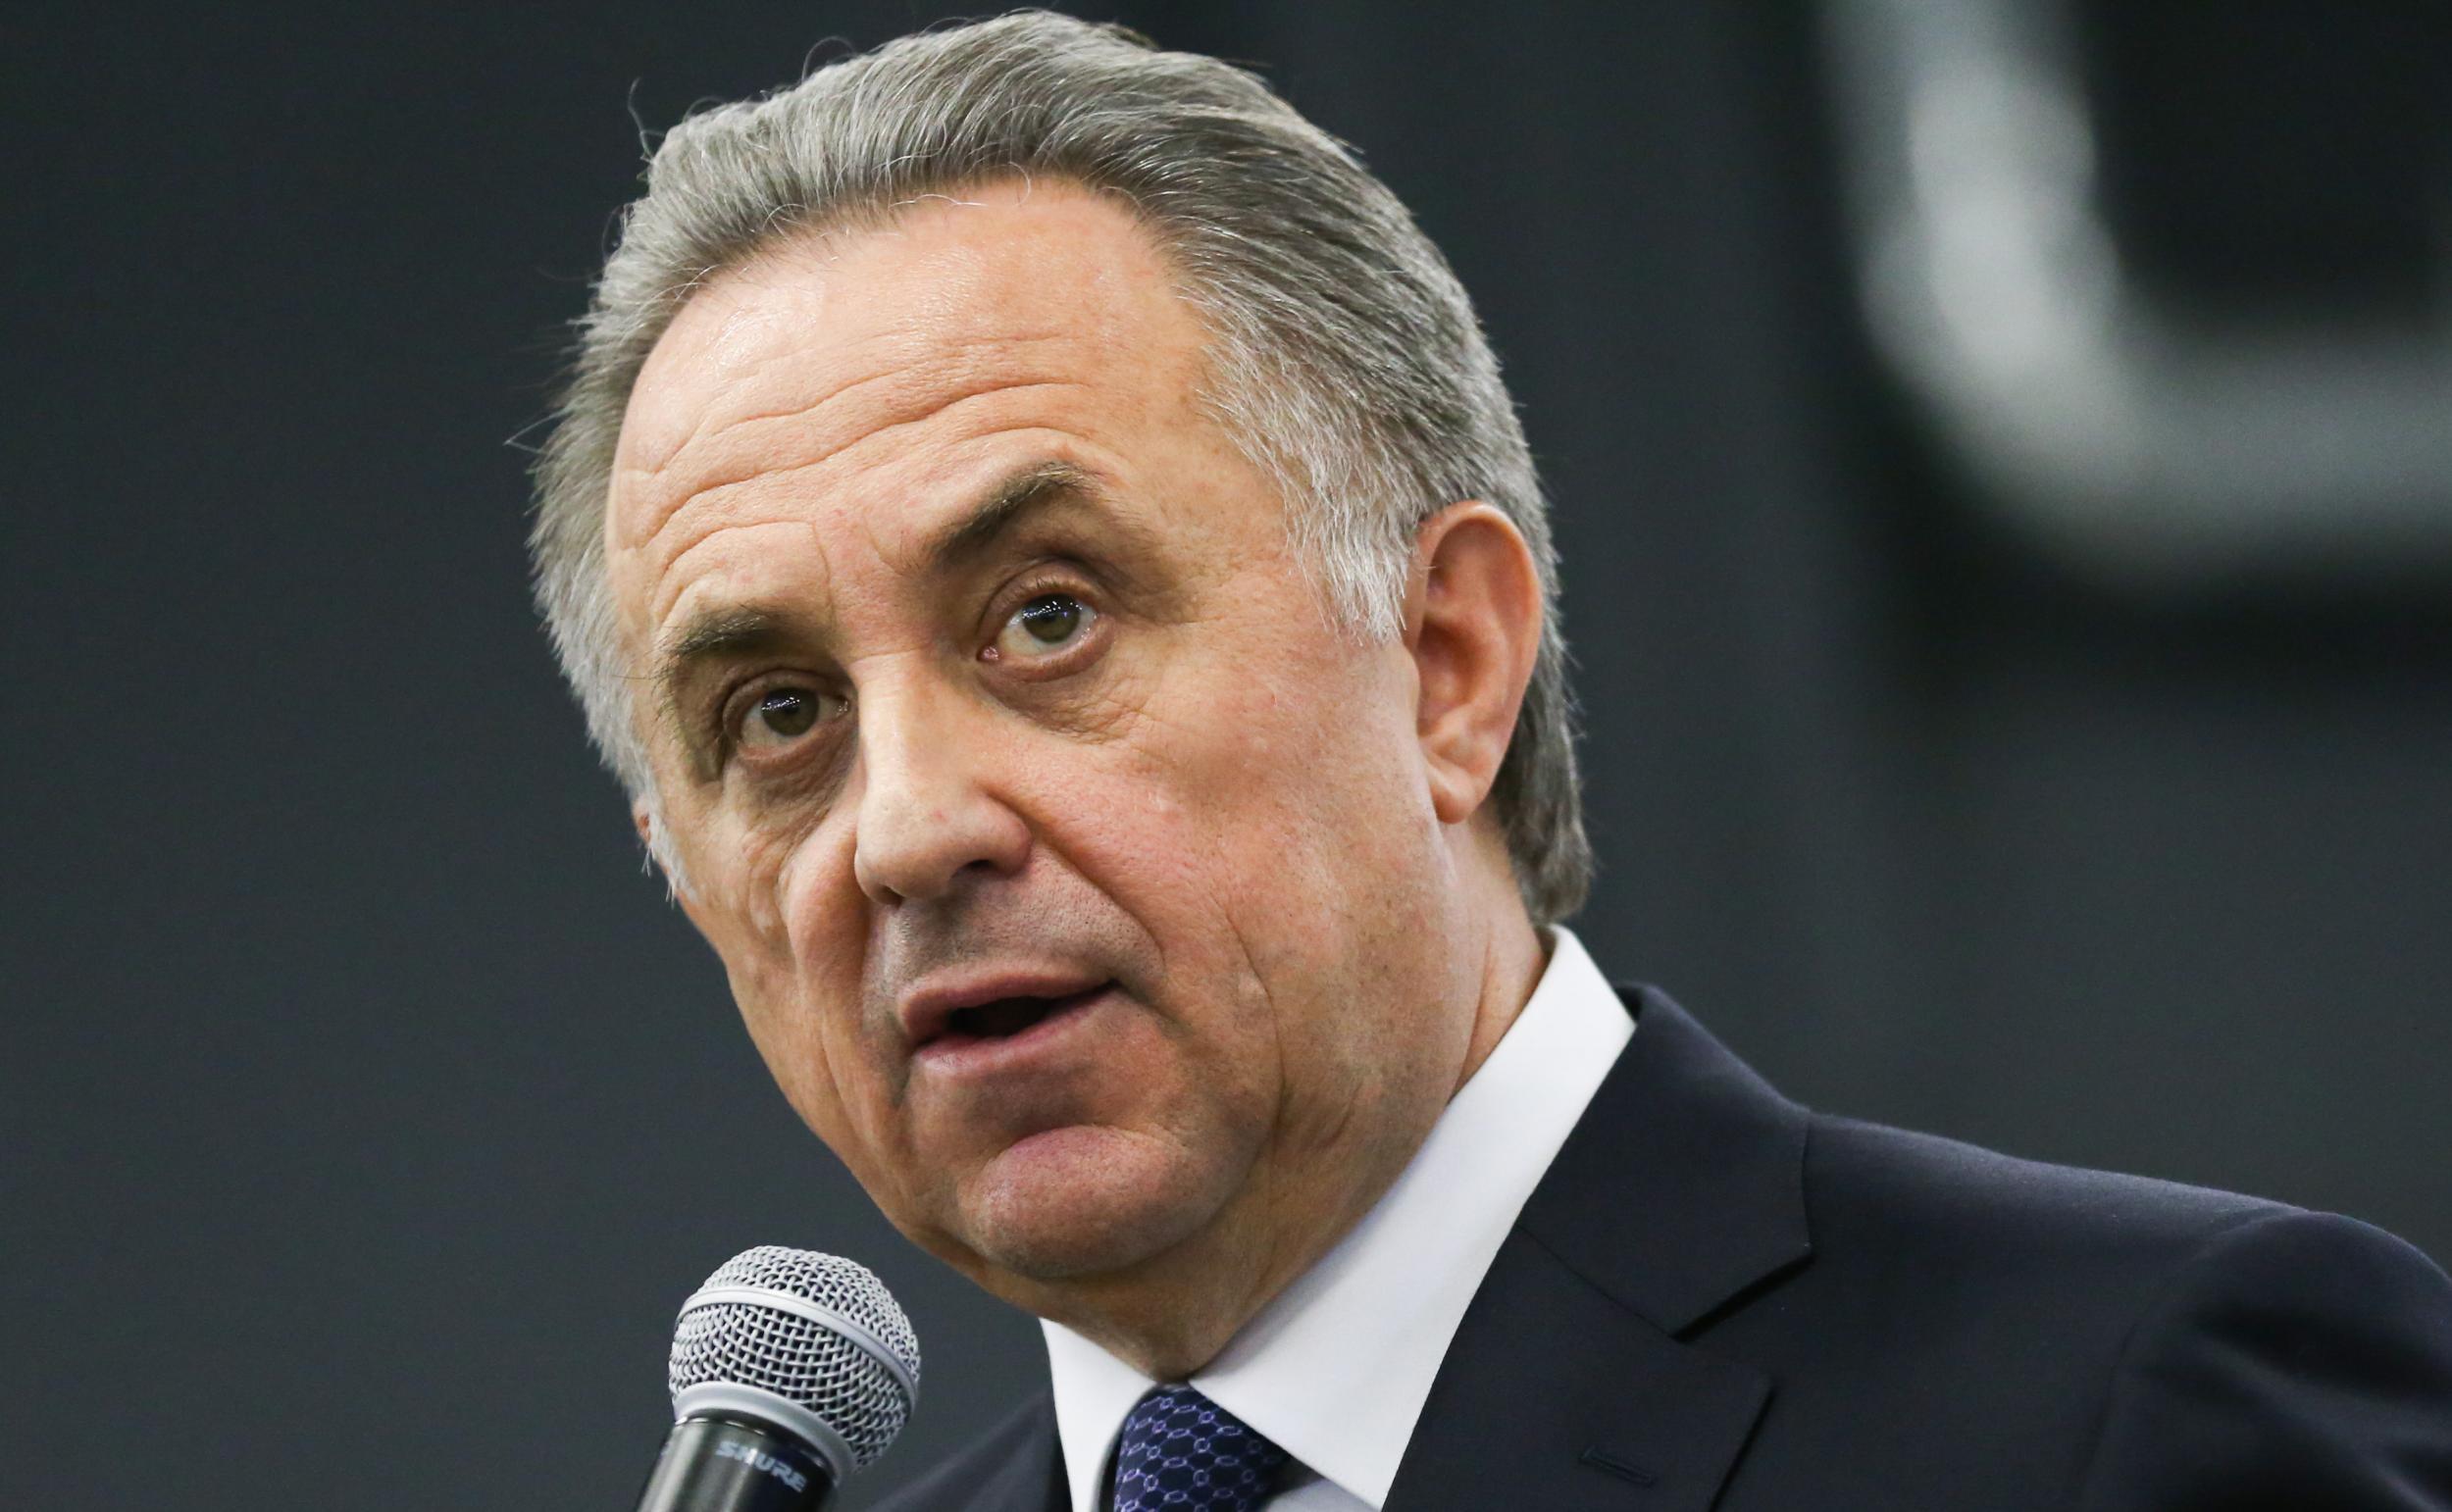 Vitaly Mutko was responsible for Russia's successful World Cup bid